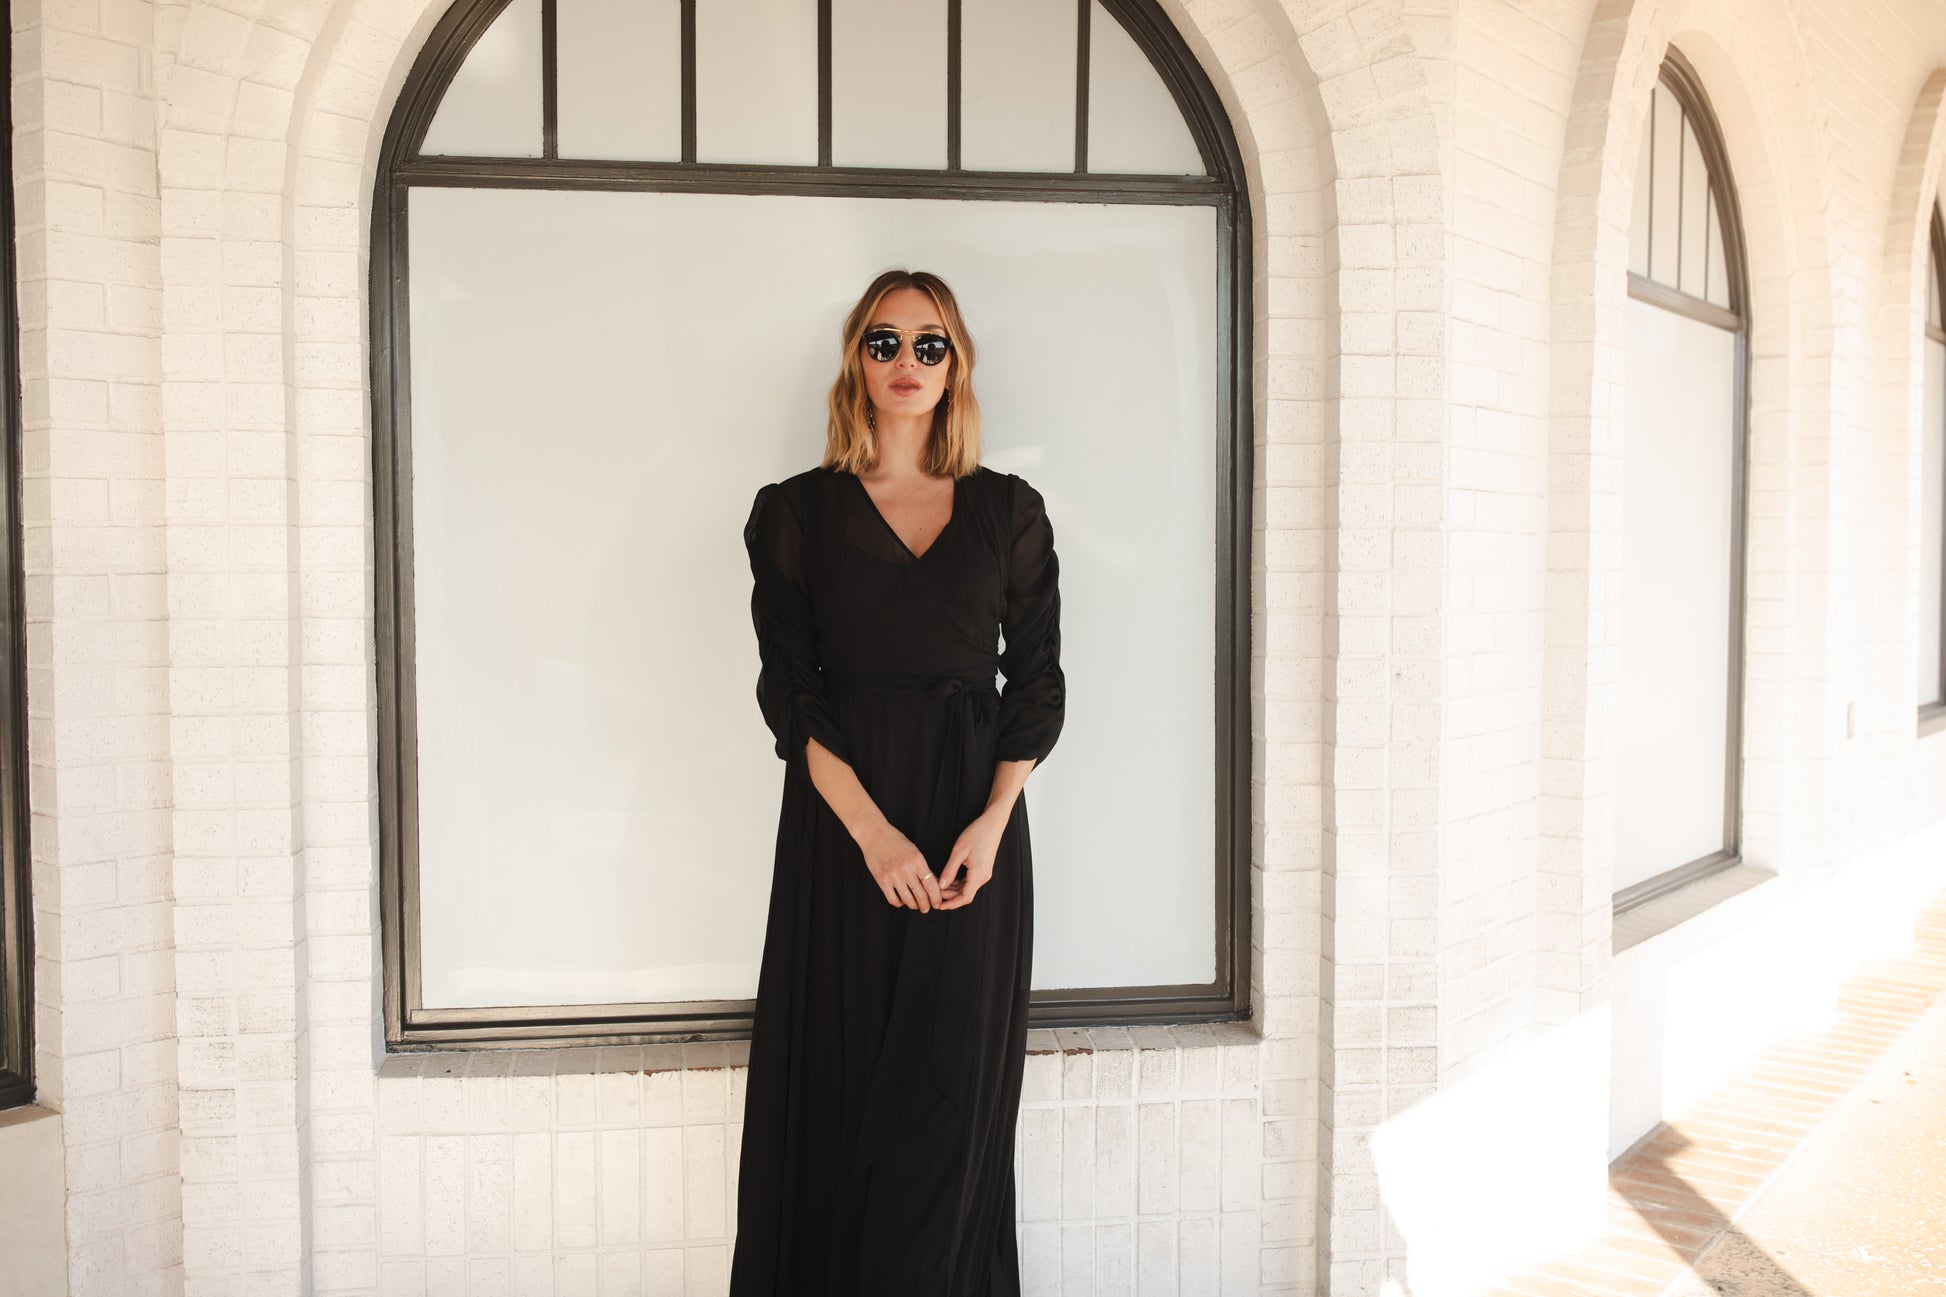 Semi-sheer black maxi dress. The dress features a wrap front, v-neck, three-quarter sleeve with ruching detail, and a matching black slip dress underneath. Classic, vintage inspired black maxi dress with a gothic flair.